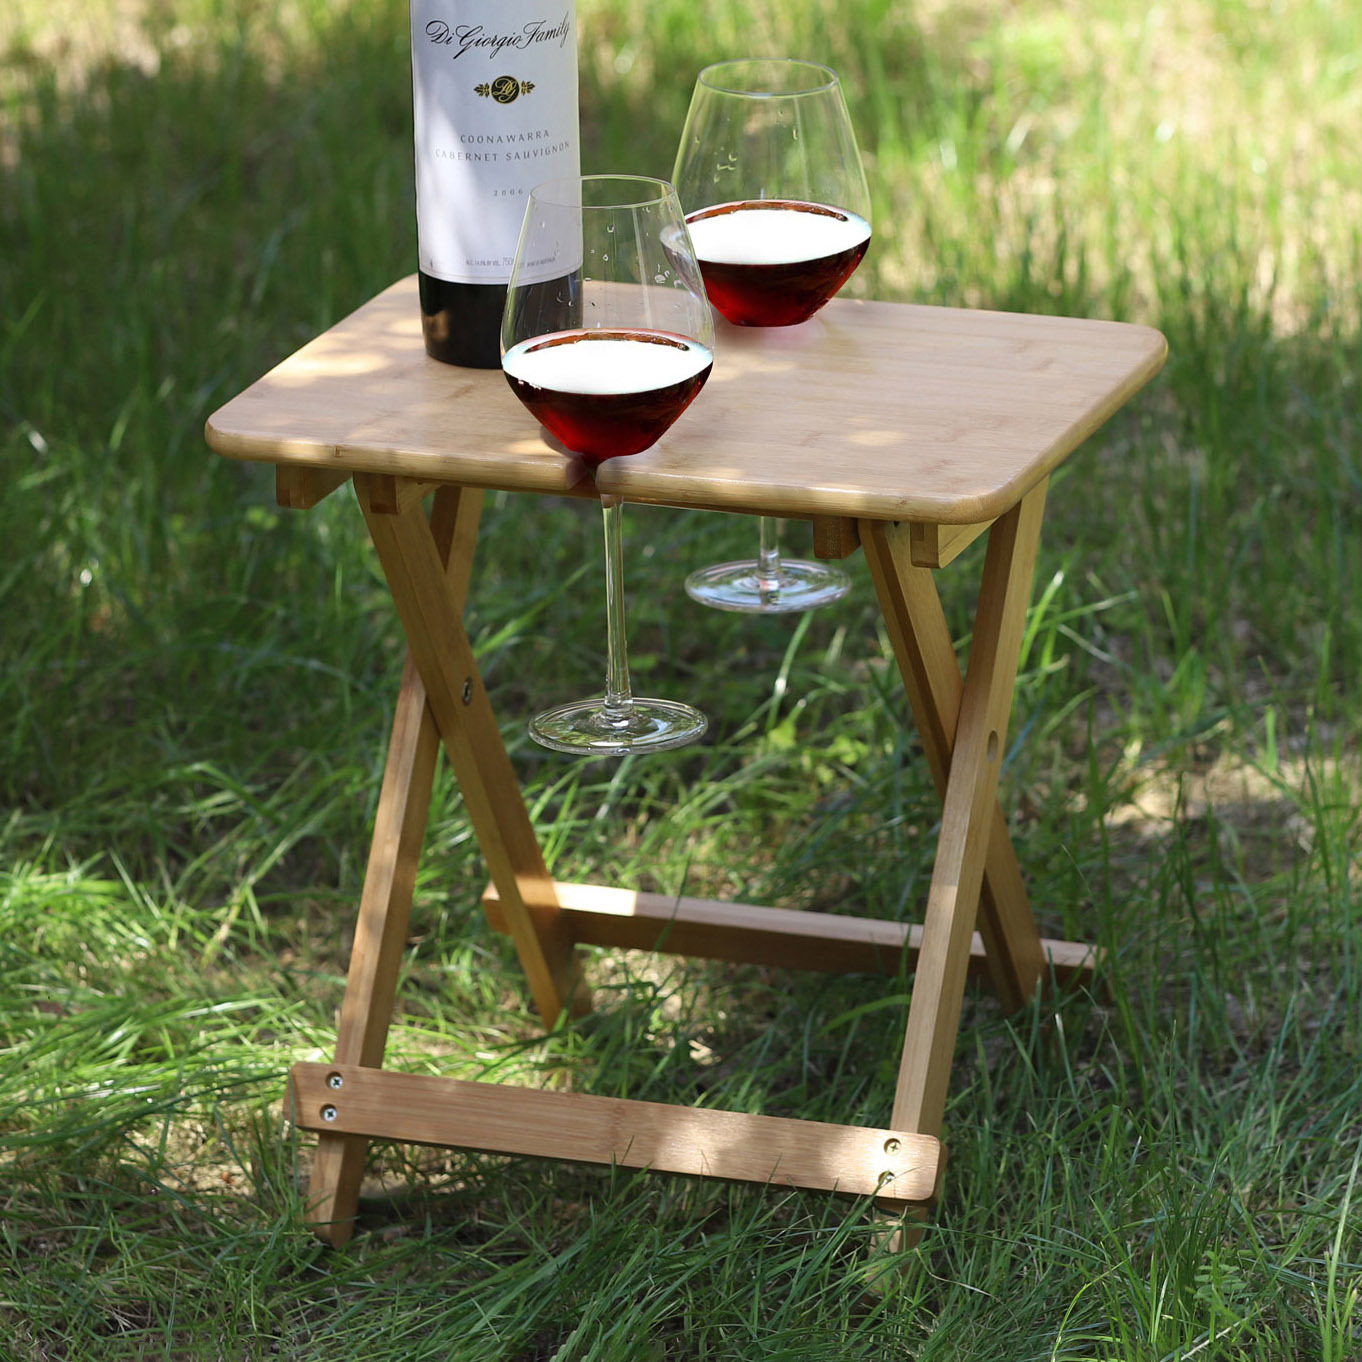 Outdoor wine table | gift ideas for mums